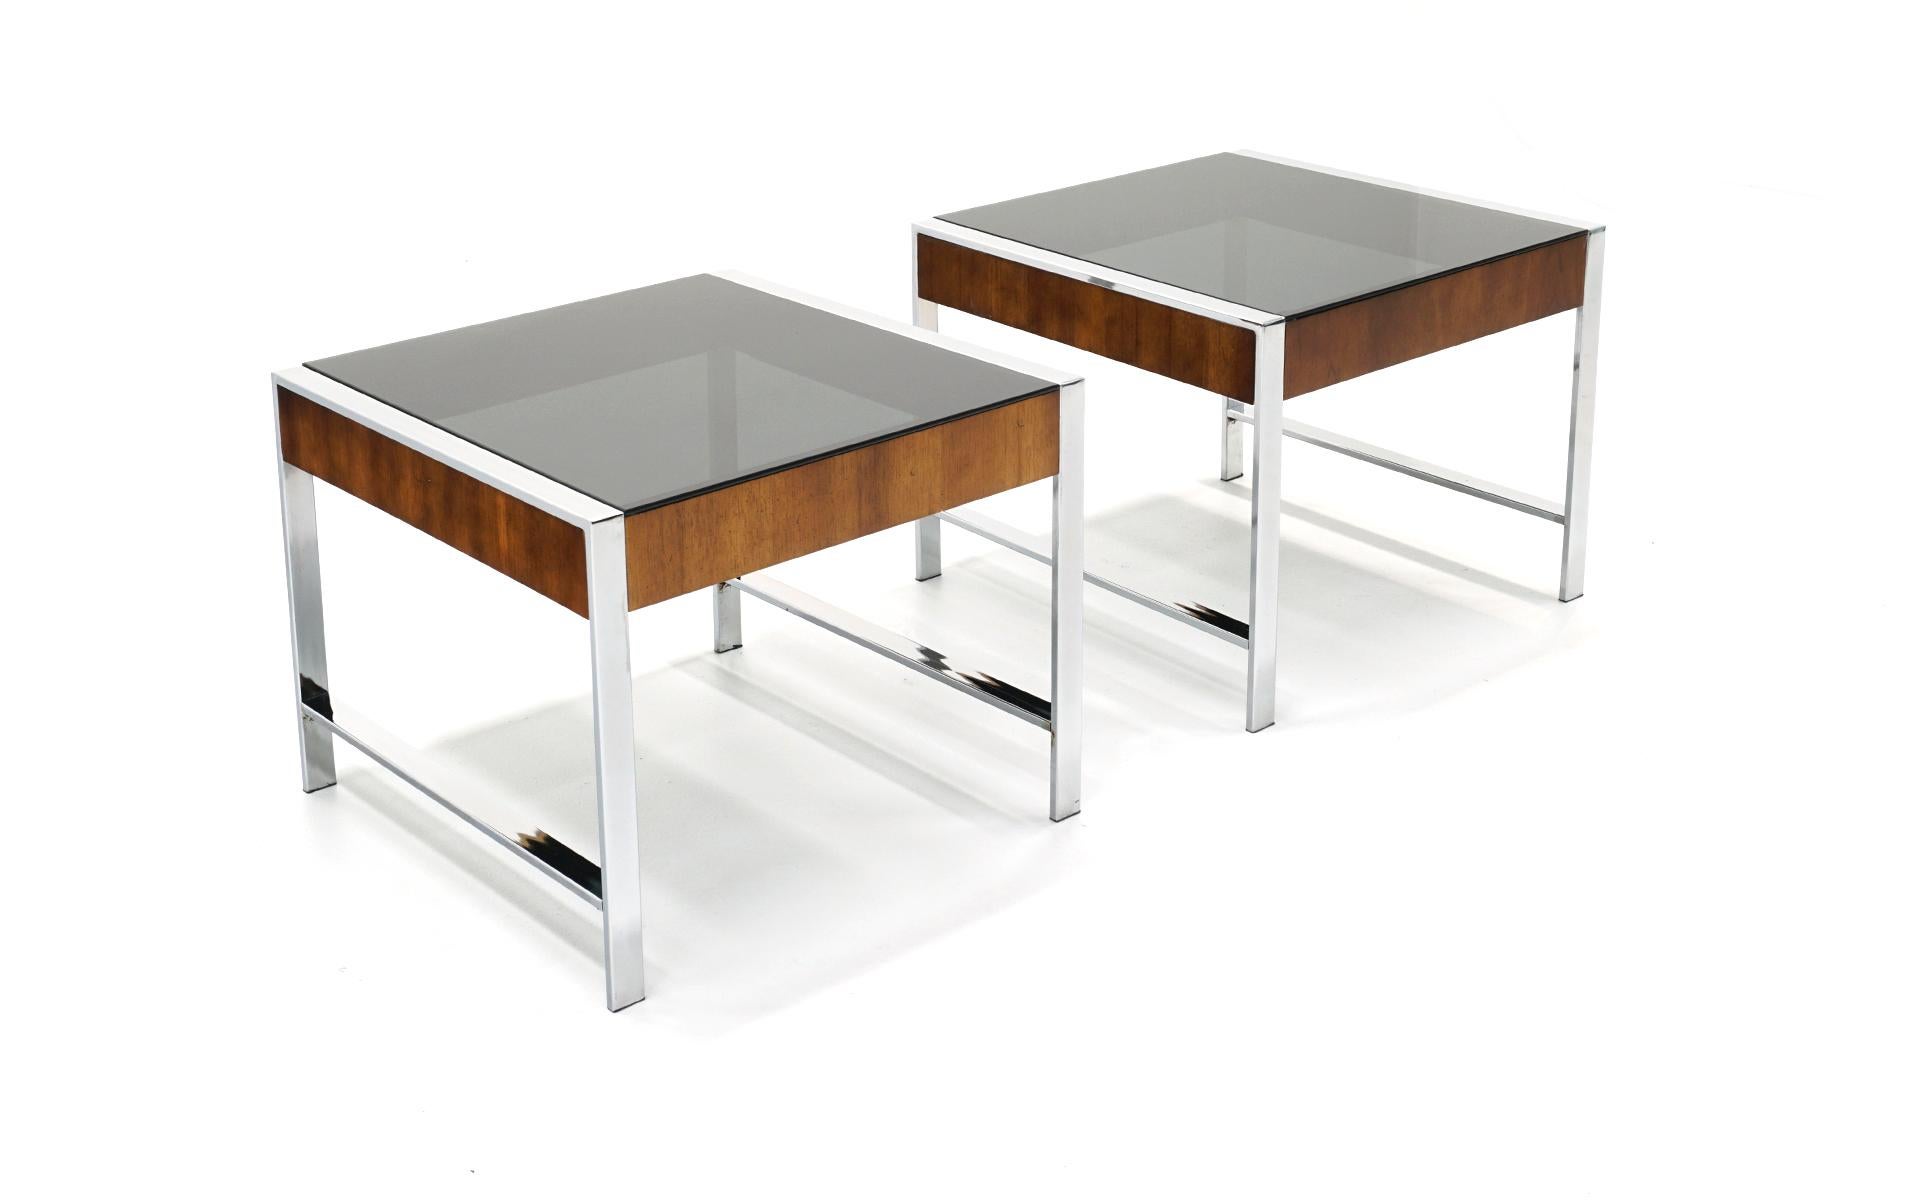 Pair of chrome and walnut end tables with smoked gray / grey glass tops. Only very light scratches to the table tops, no pitting to the chrome and a few very small blemishes to the walnut. Priced to sell.